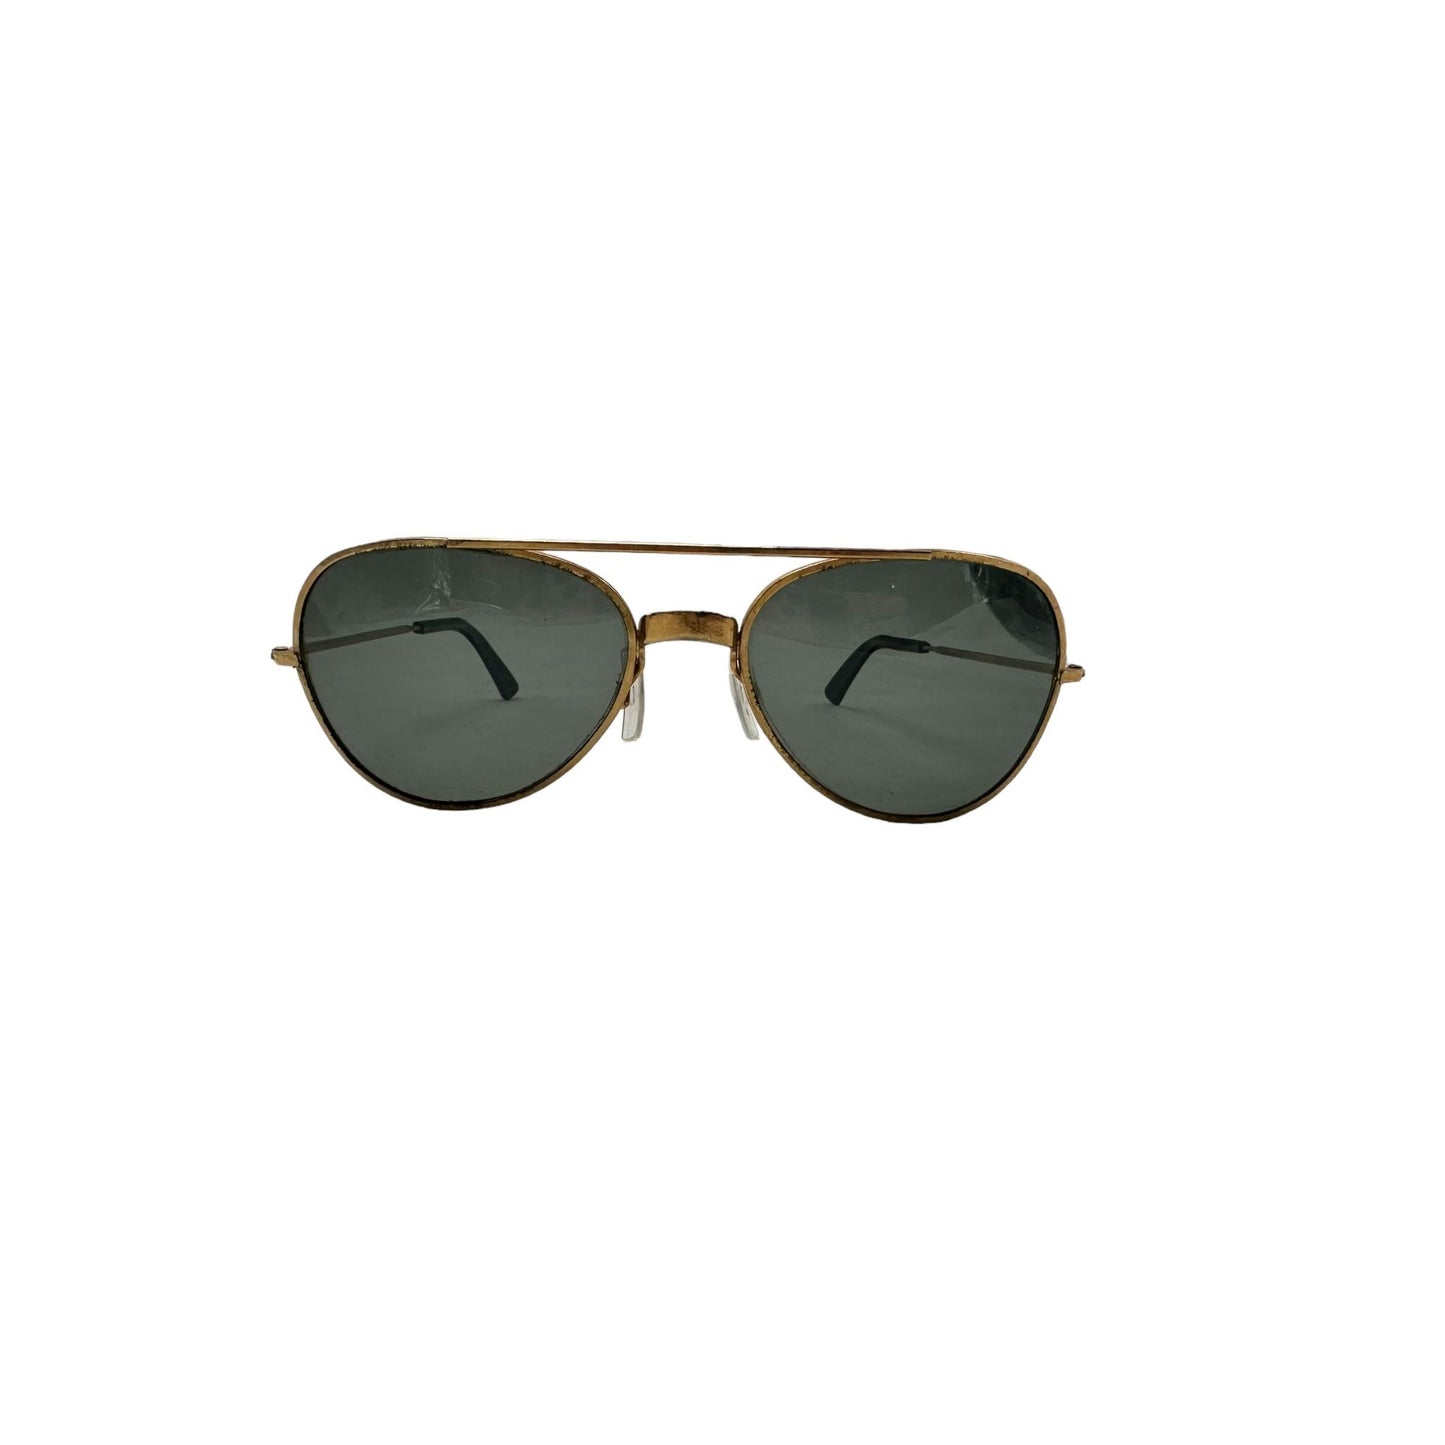 Vintage Cool-Ray Mens Polaroid Gold in Metal Frame Sunglasses Retro Outdoor Classic